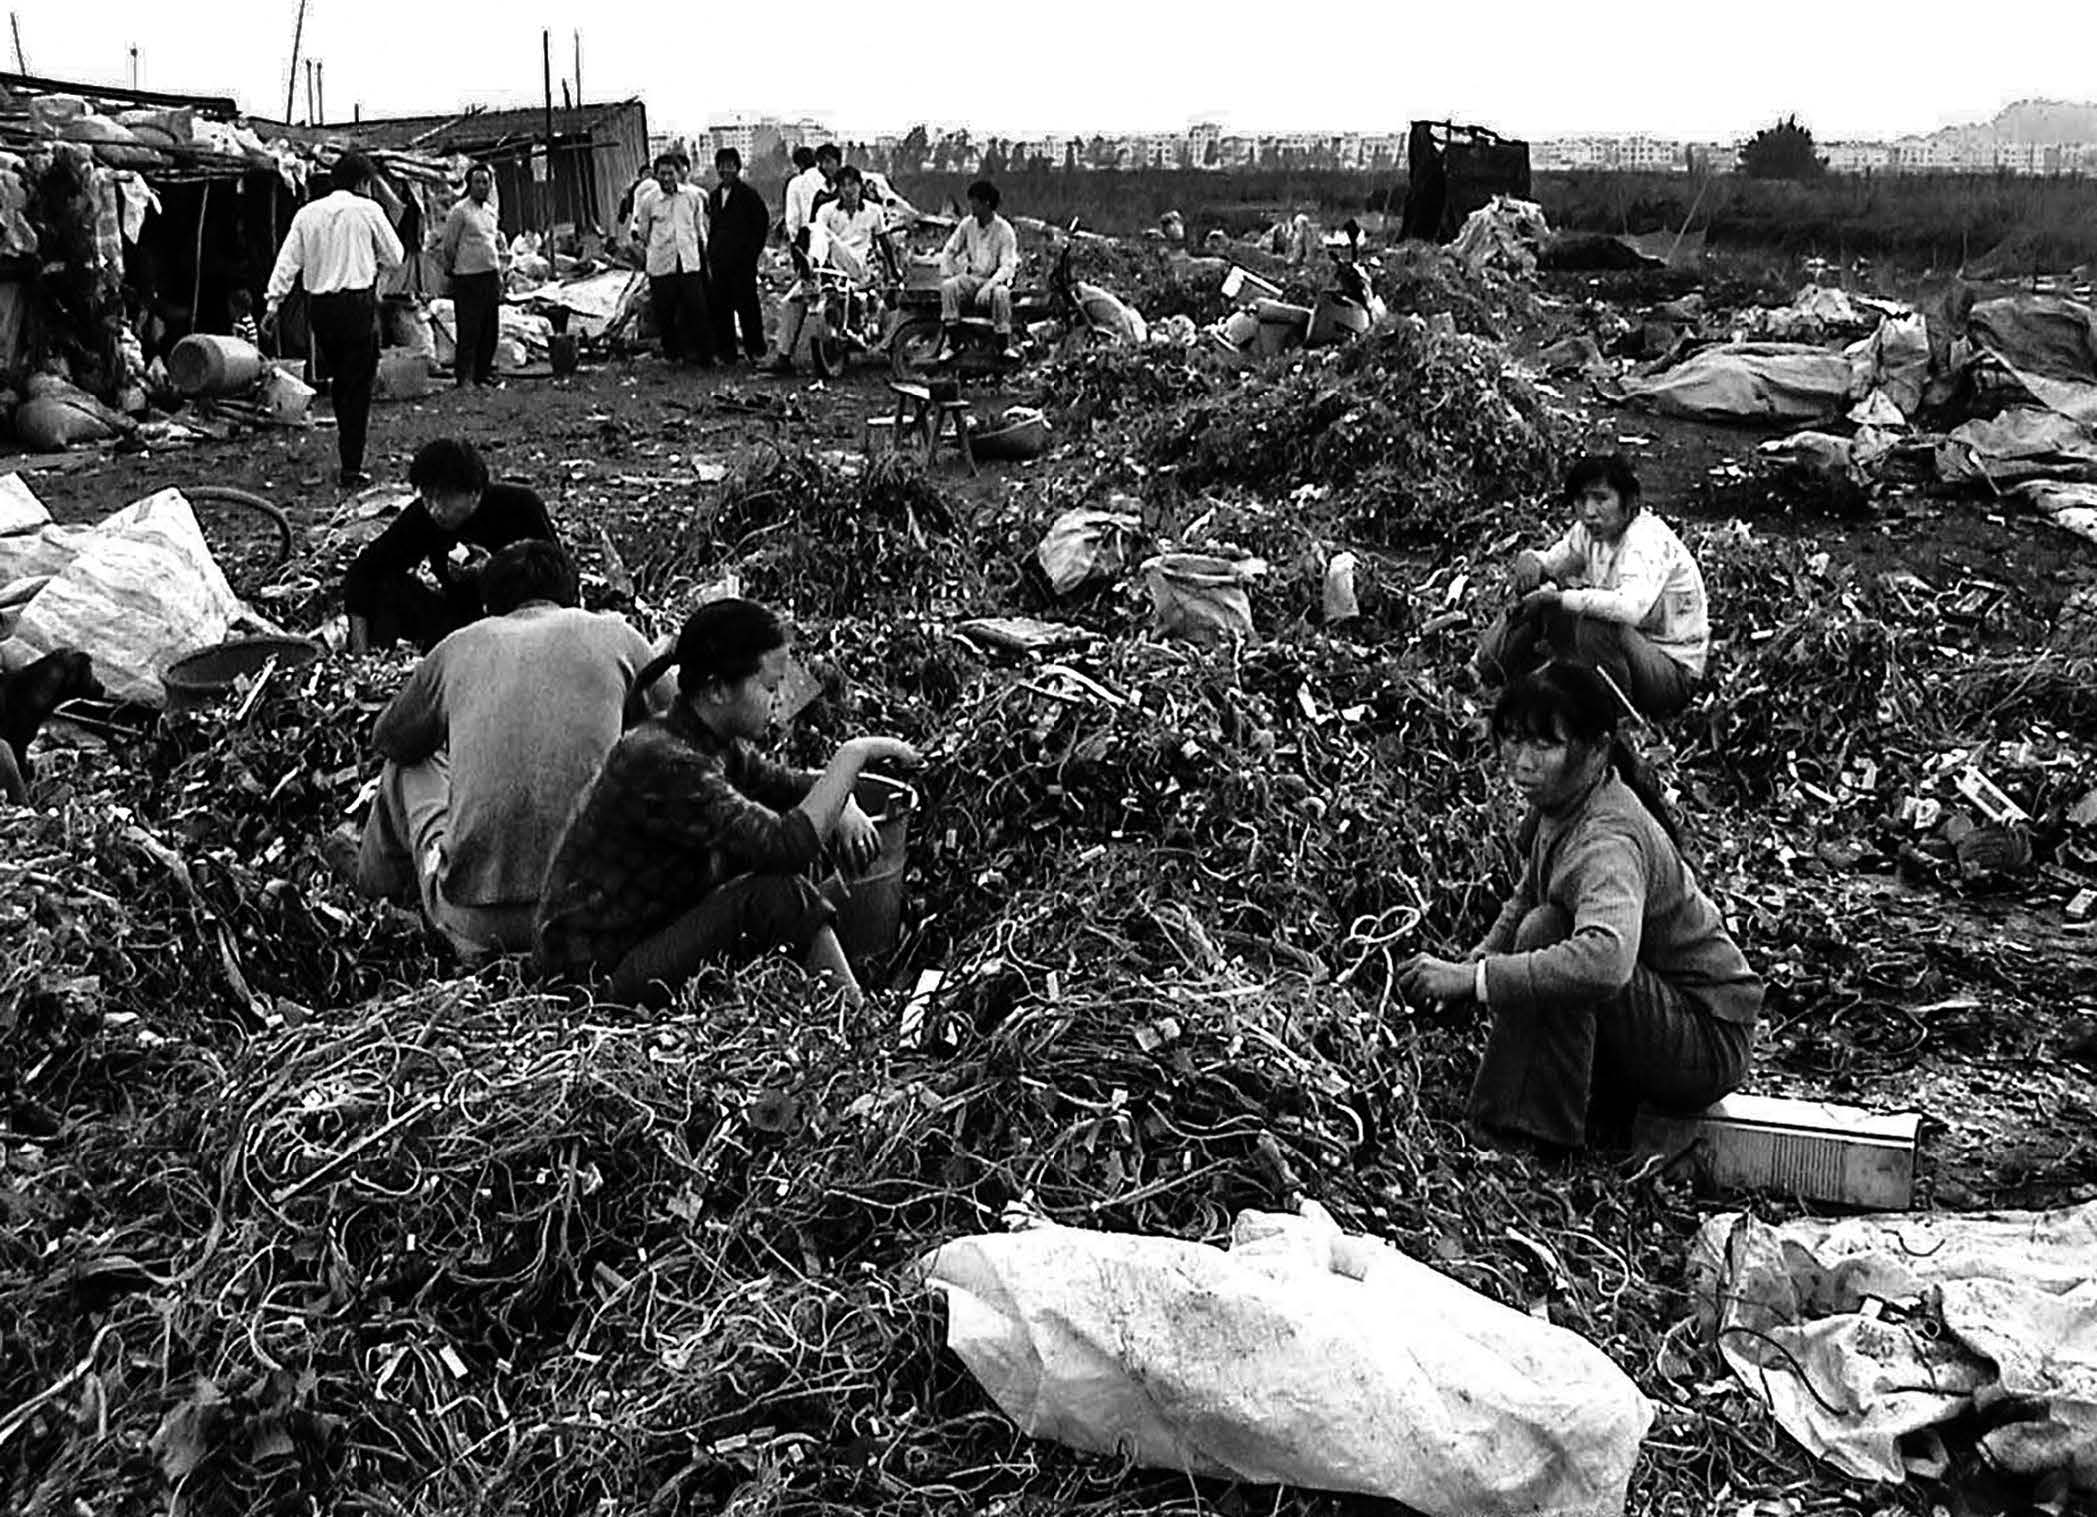 Photograph of factory workers sifting through mounds of wire and electrical waste outdoors. 